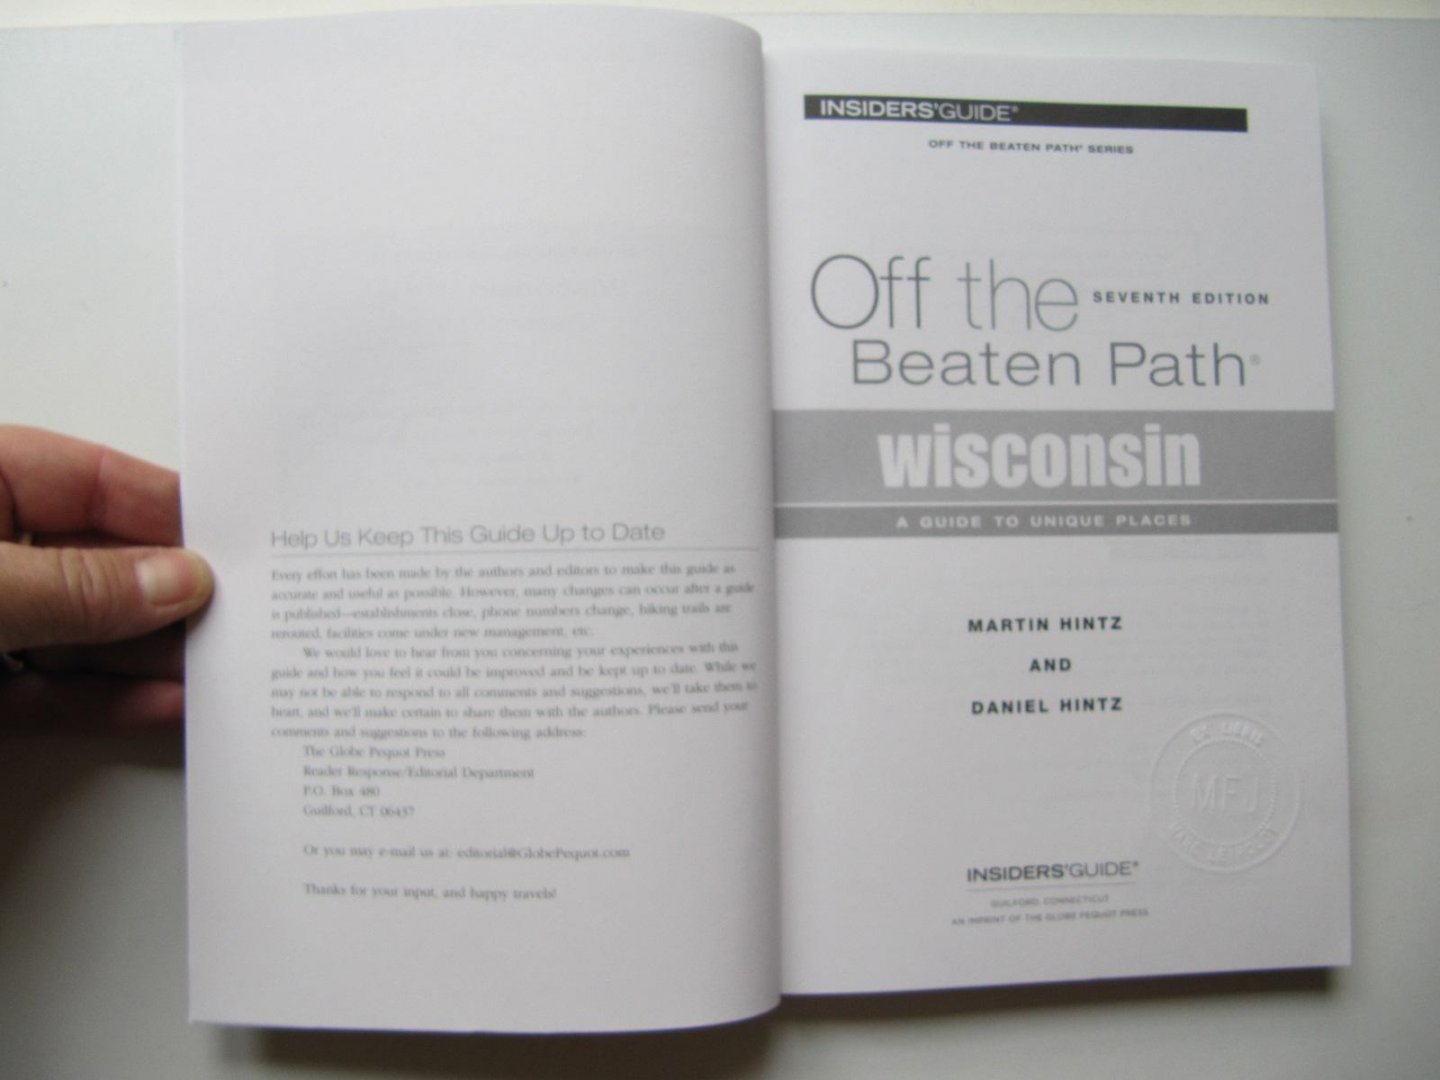 Martin Hintz and Daniel Hintz - Off the Beaten Path -Wisconsin [a guide to unique places]